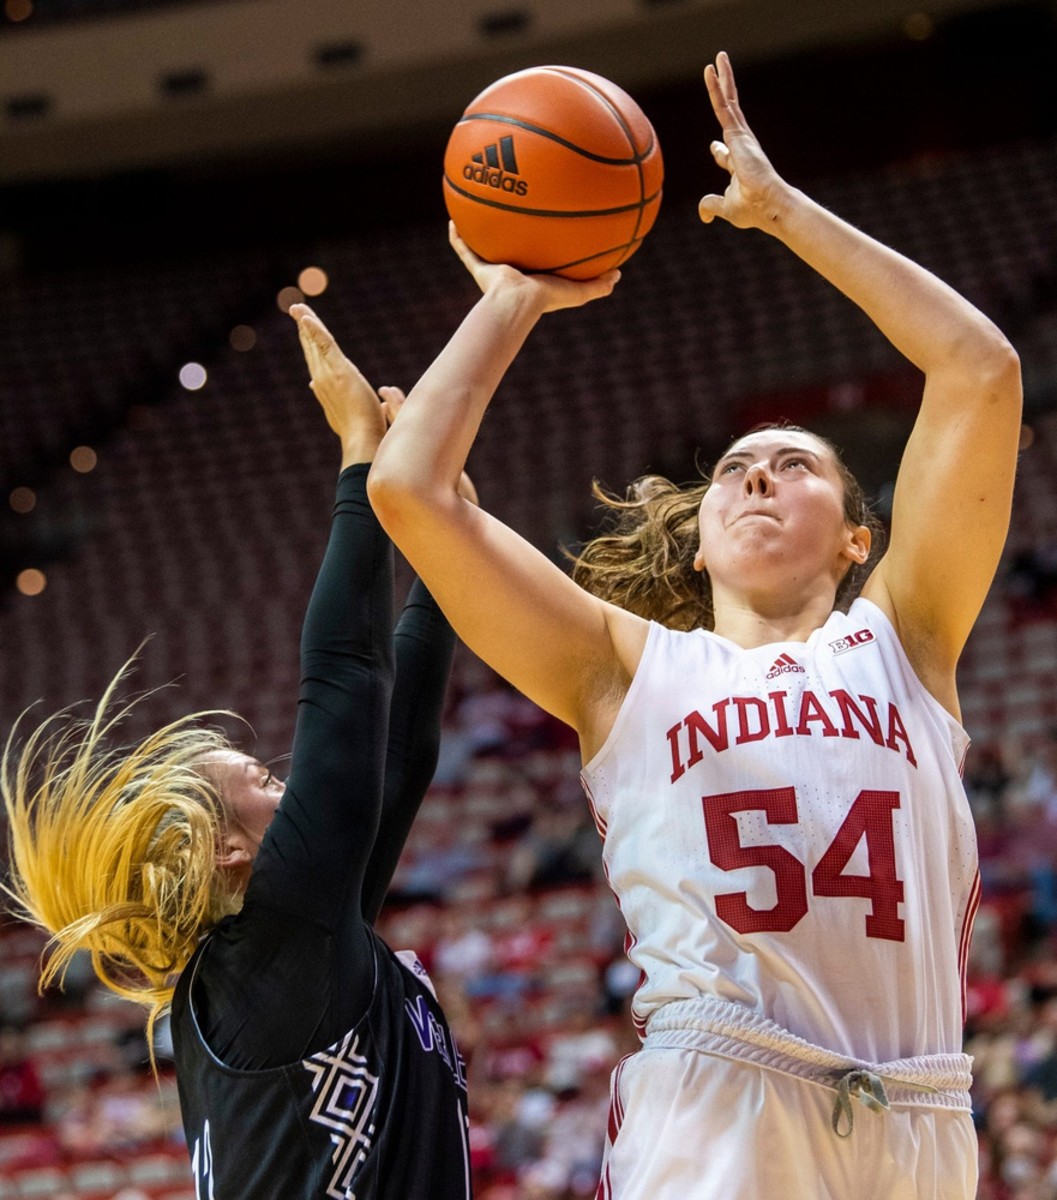 Indiana's Mackenzie Holmes (54) scores during the Indiana versus Kentucky Wesleyan women's basketball game at Simon Skjodt Assembly Hall on Friday, Nov. 4, 2022.